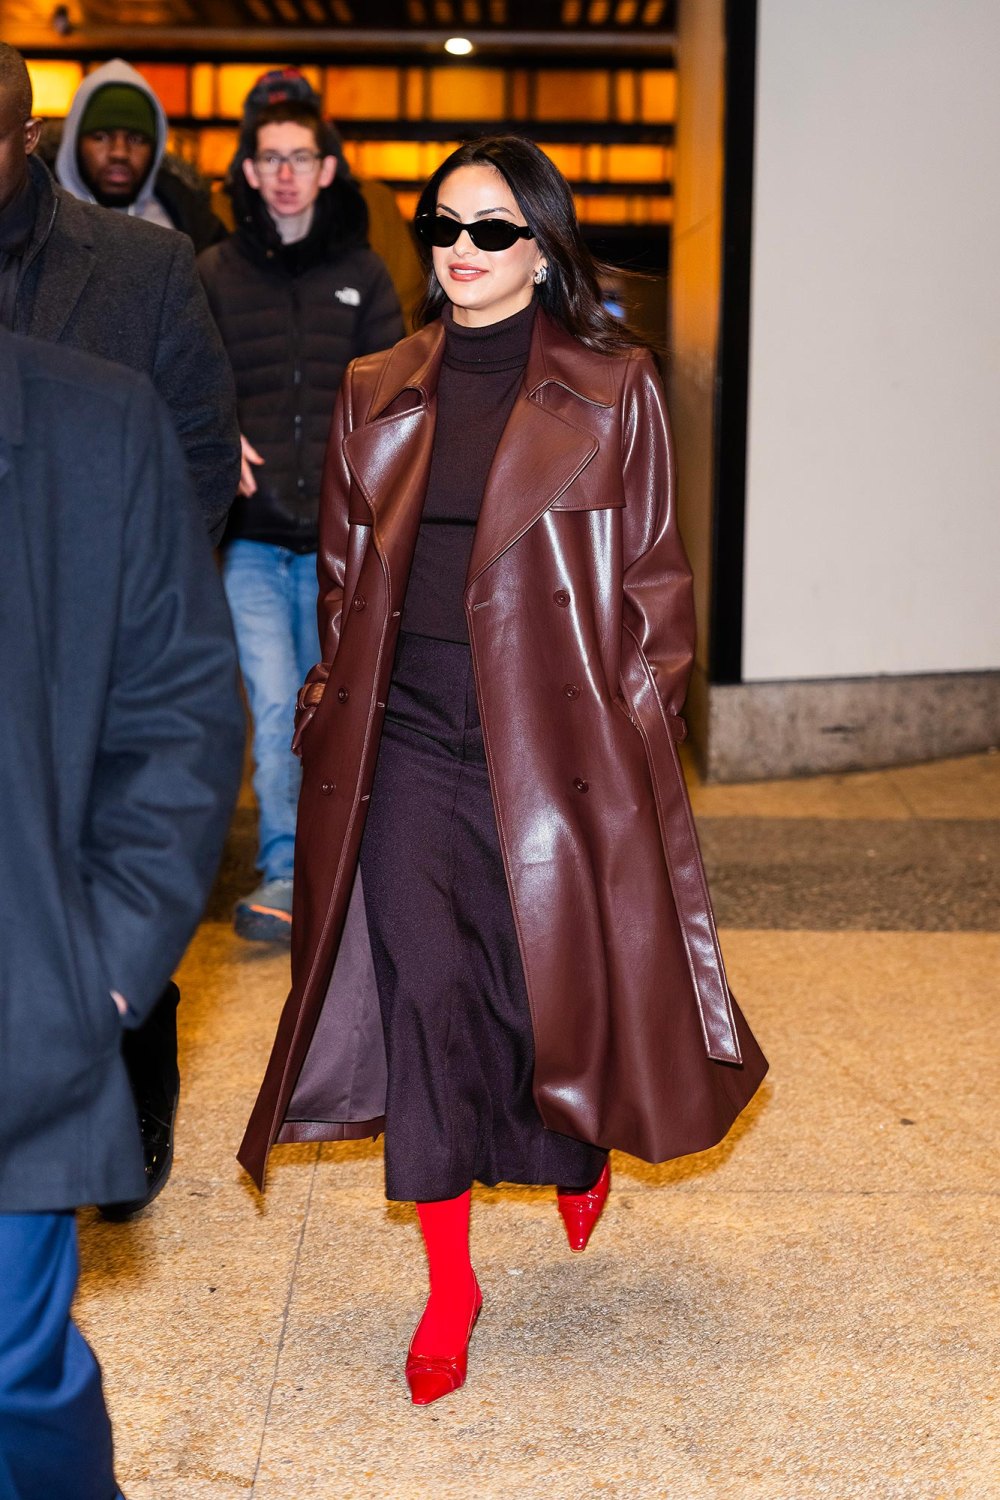 Camila Mendes Channels Jennifer Anistons Friends Wardrobe in Latest NYC Looks